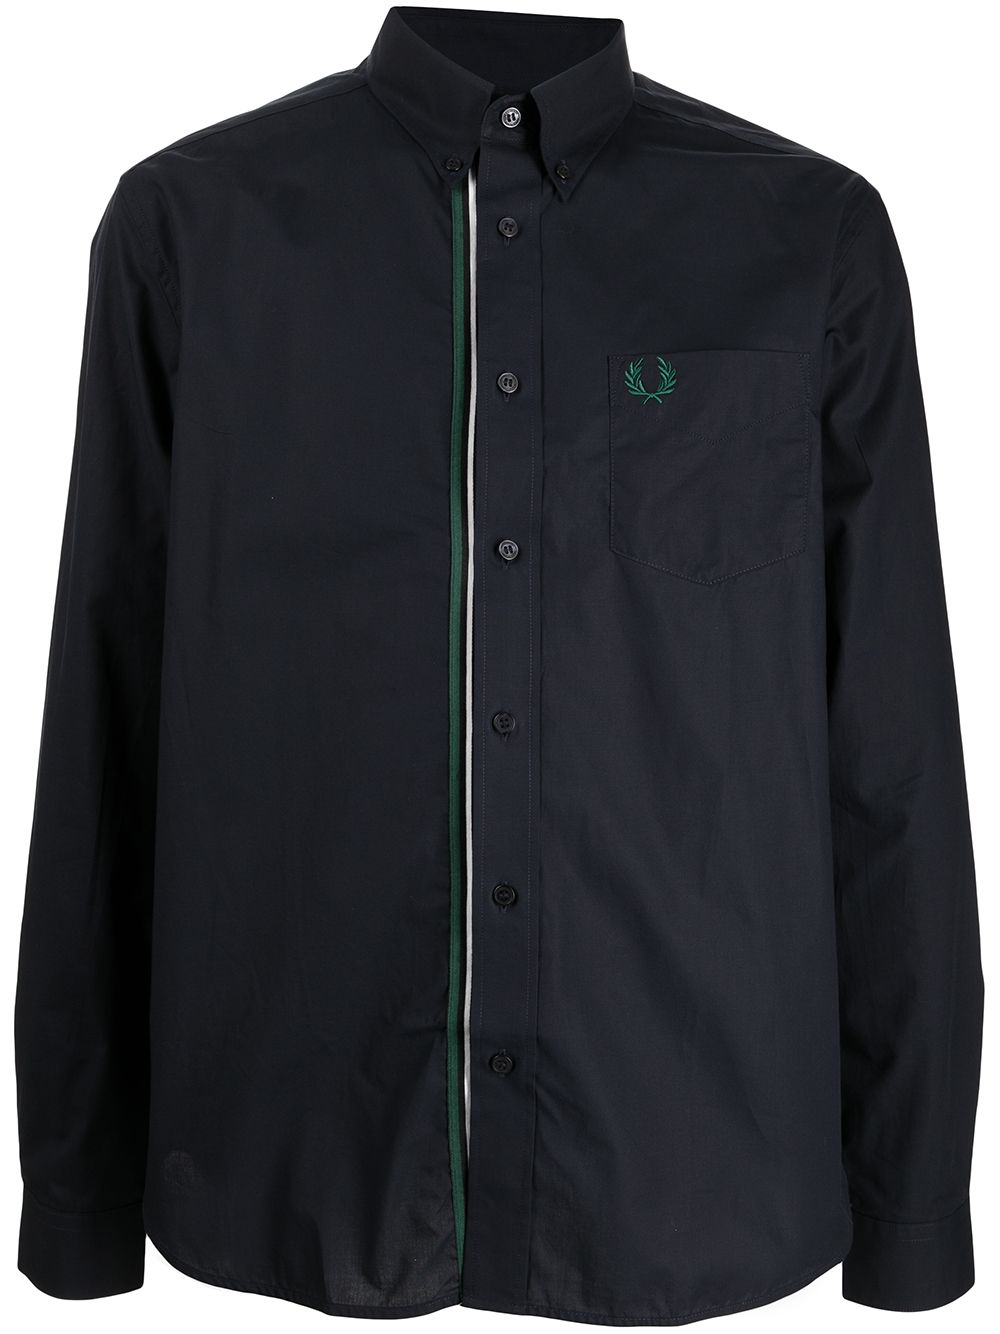 Shop FRED PERRY logo embroidered shirt with Express Delivery - FARFETCH